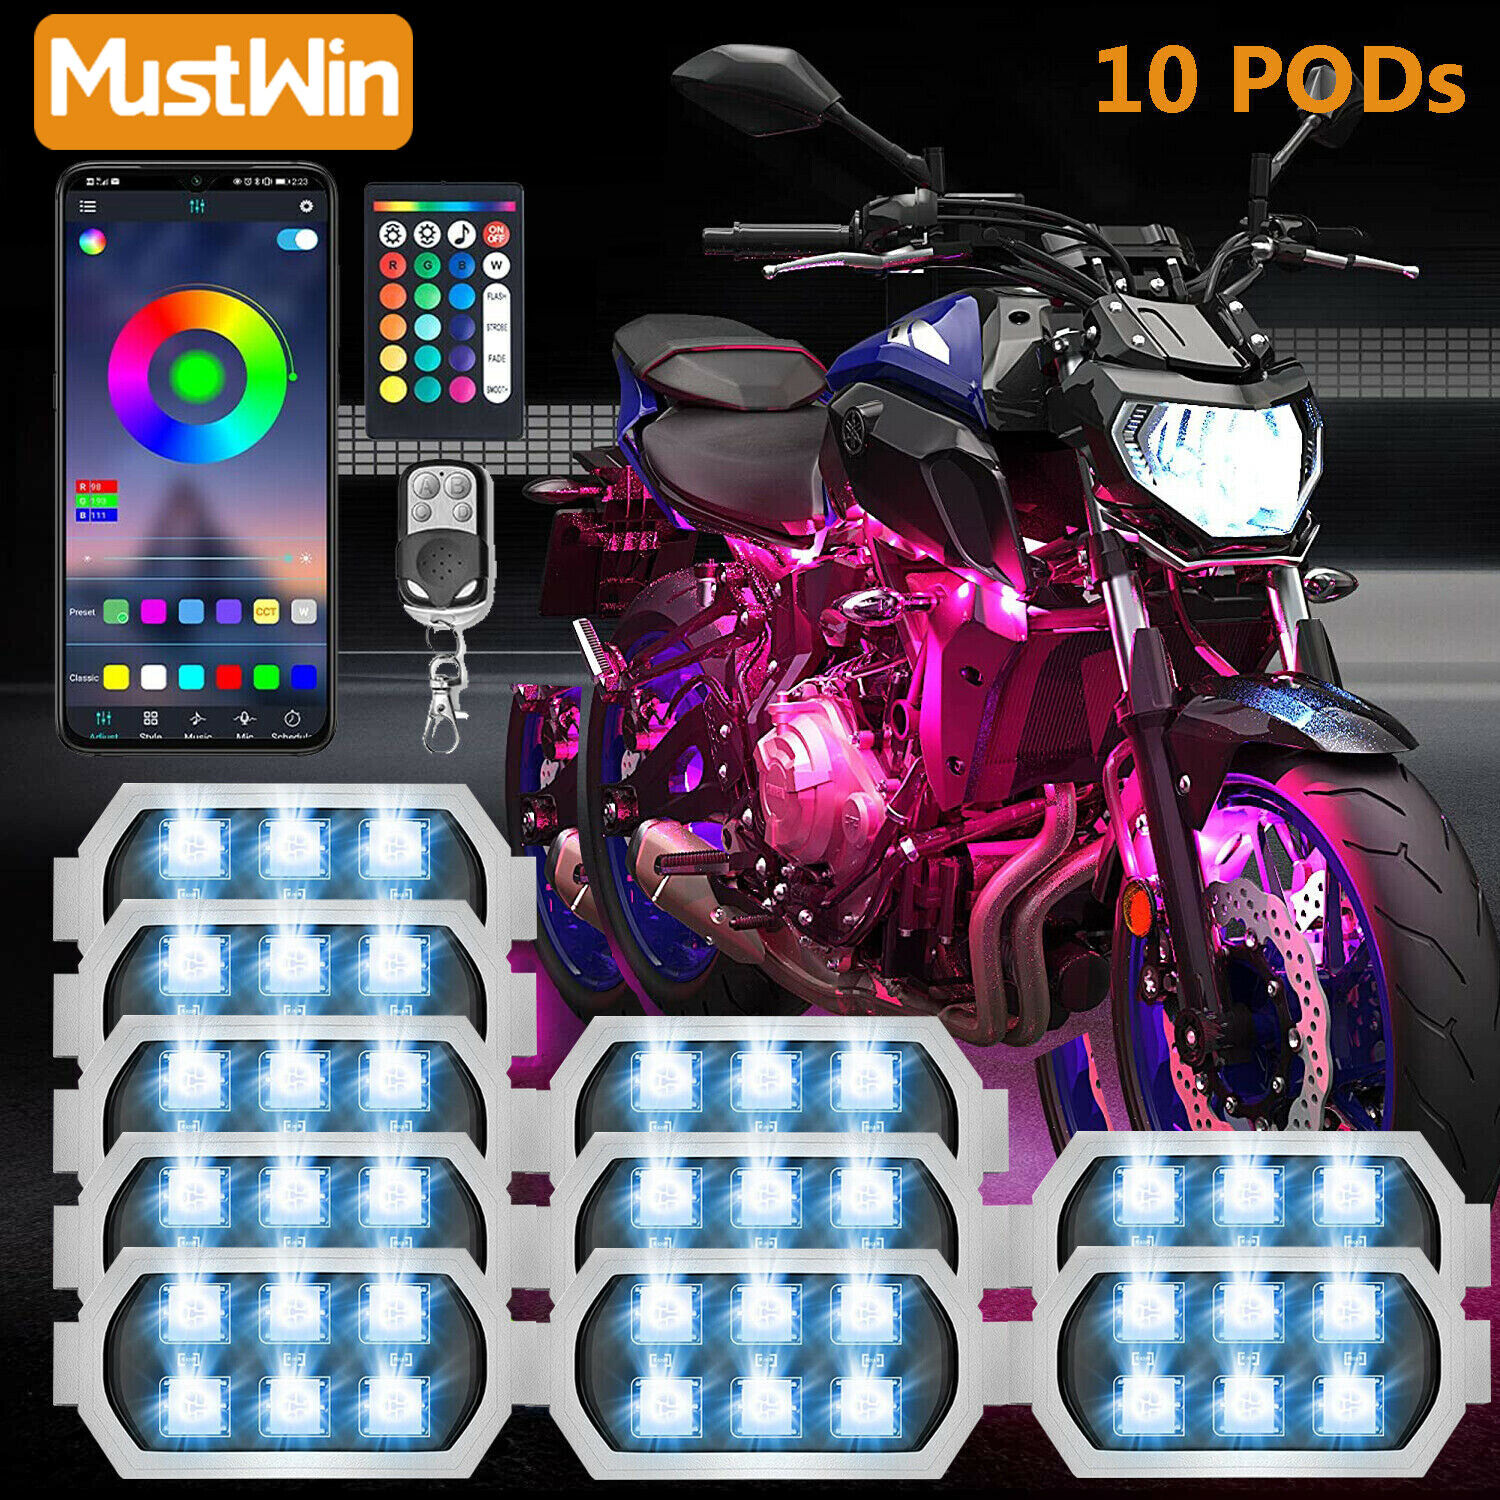 10 Pods RGB LED Rock Lights for Motorcycle Underglow Light Kit with APP Control